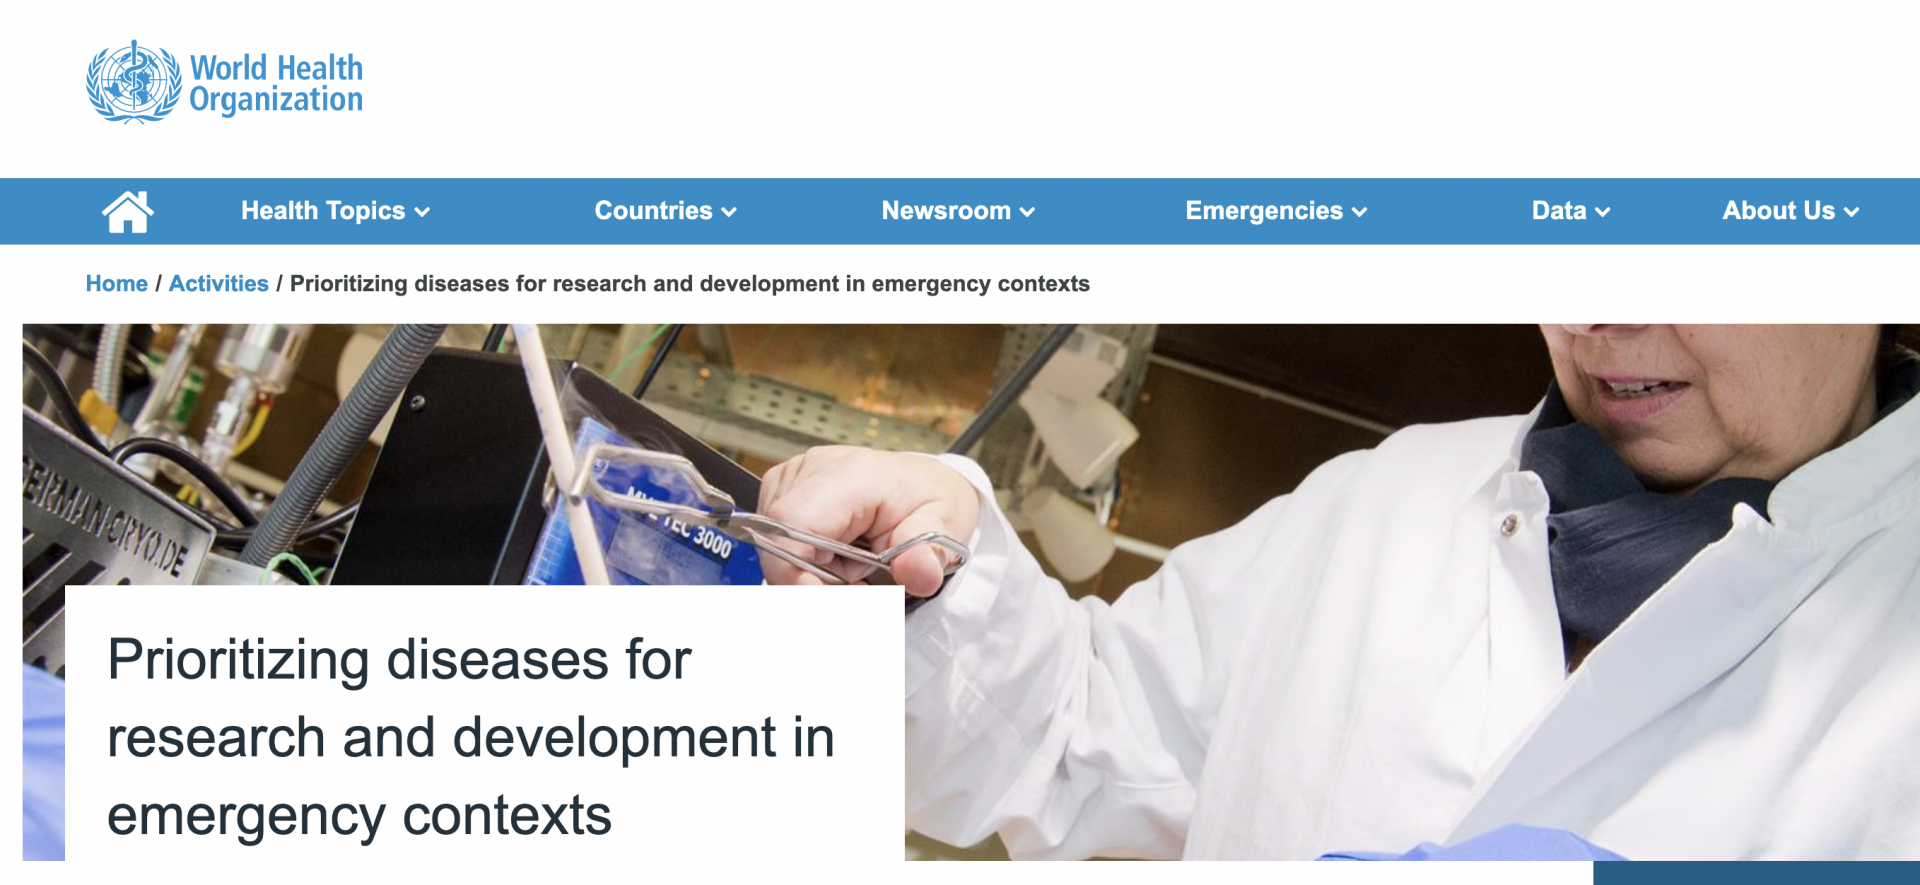 Prioritizing diseases for research and development in emergency contexts